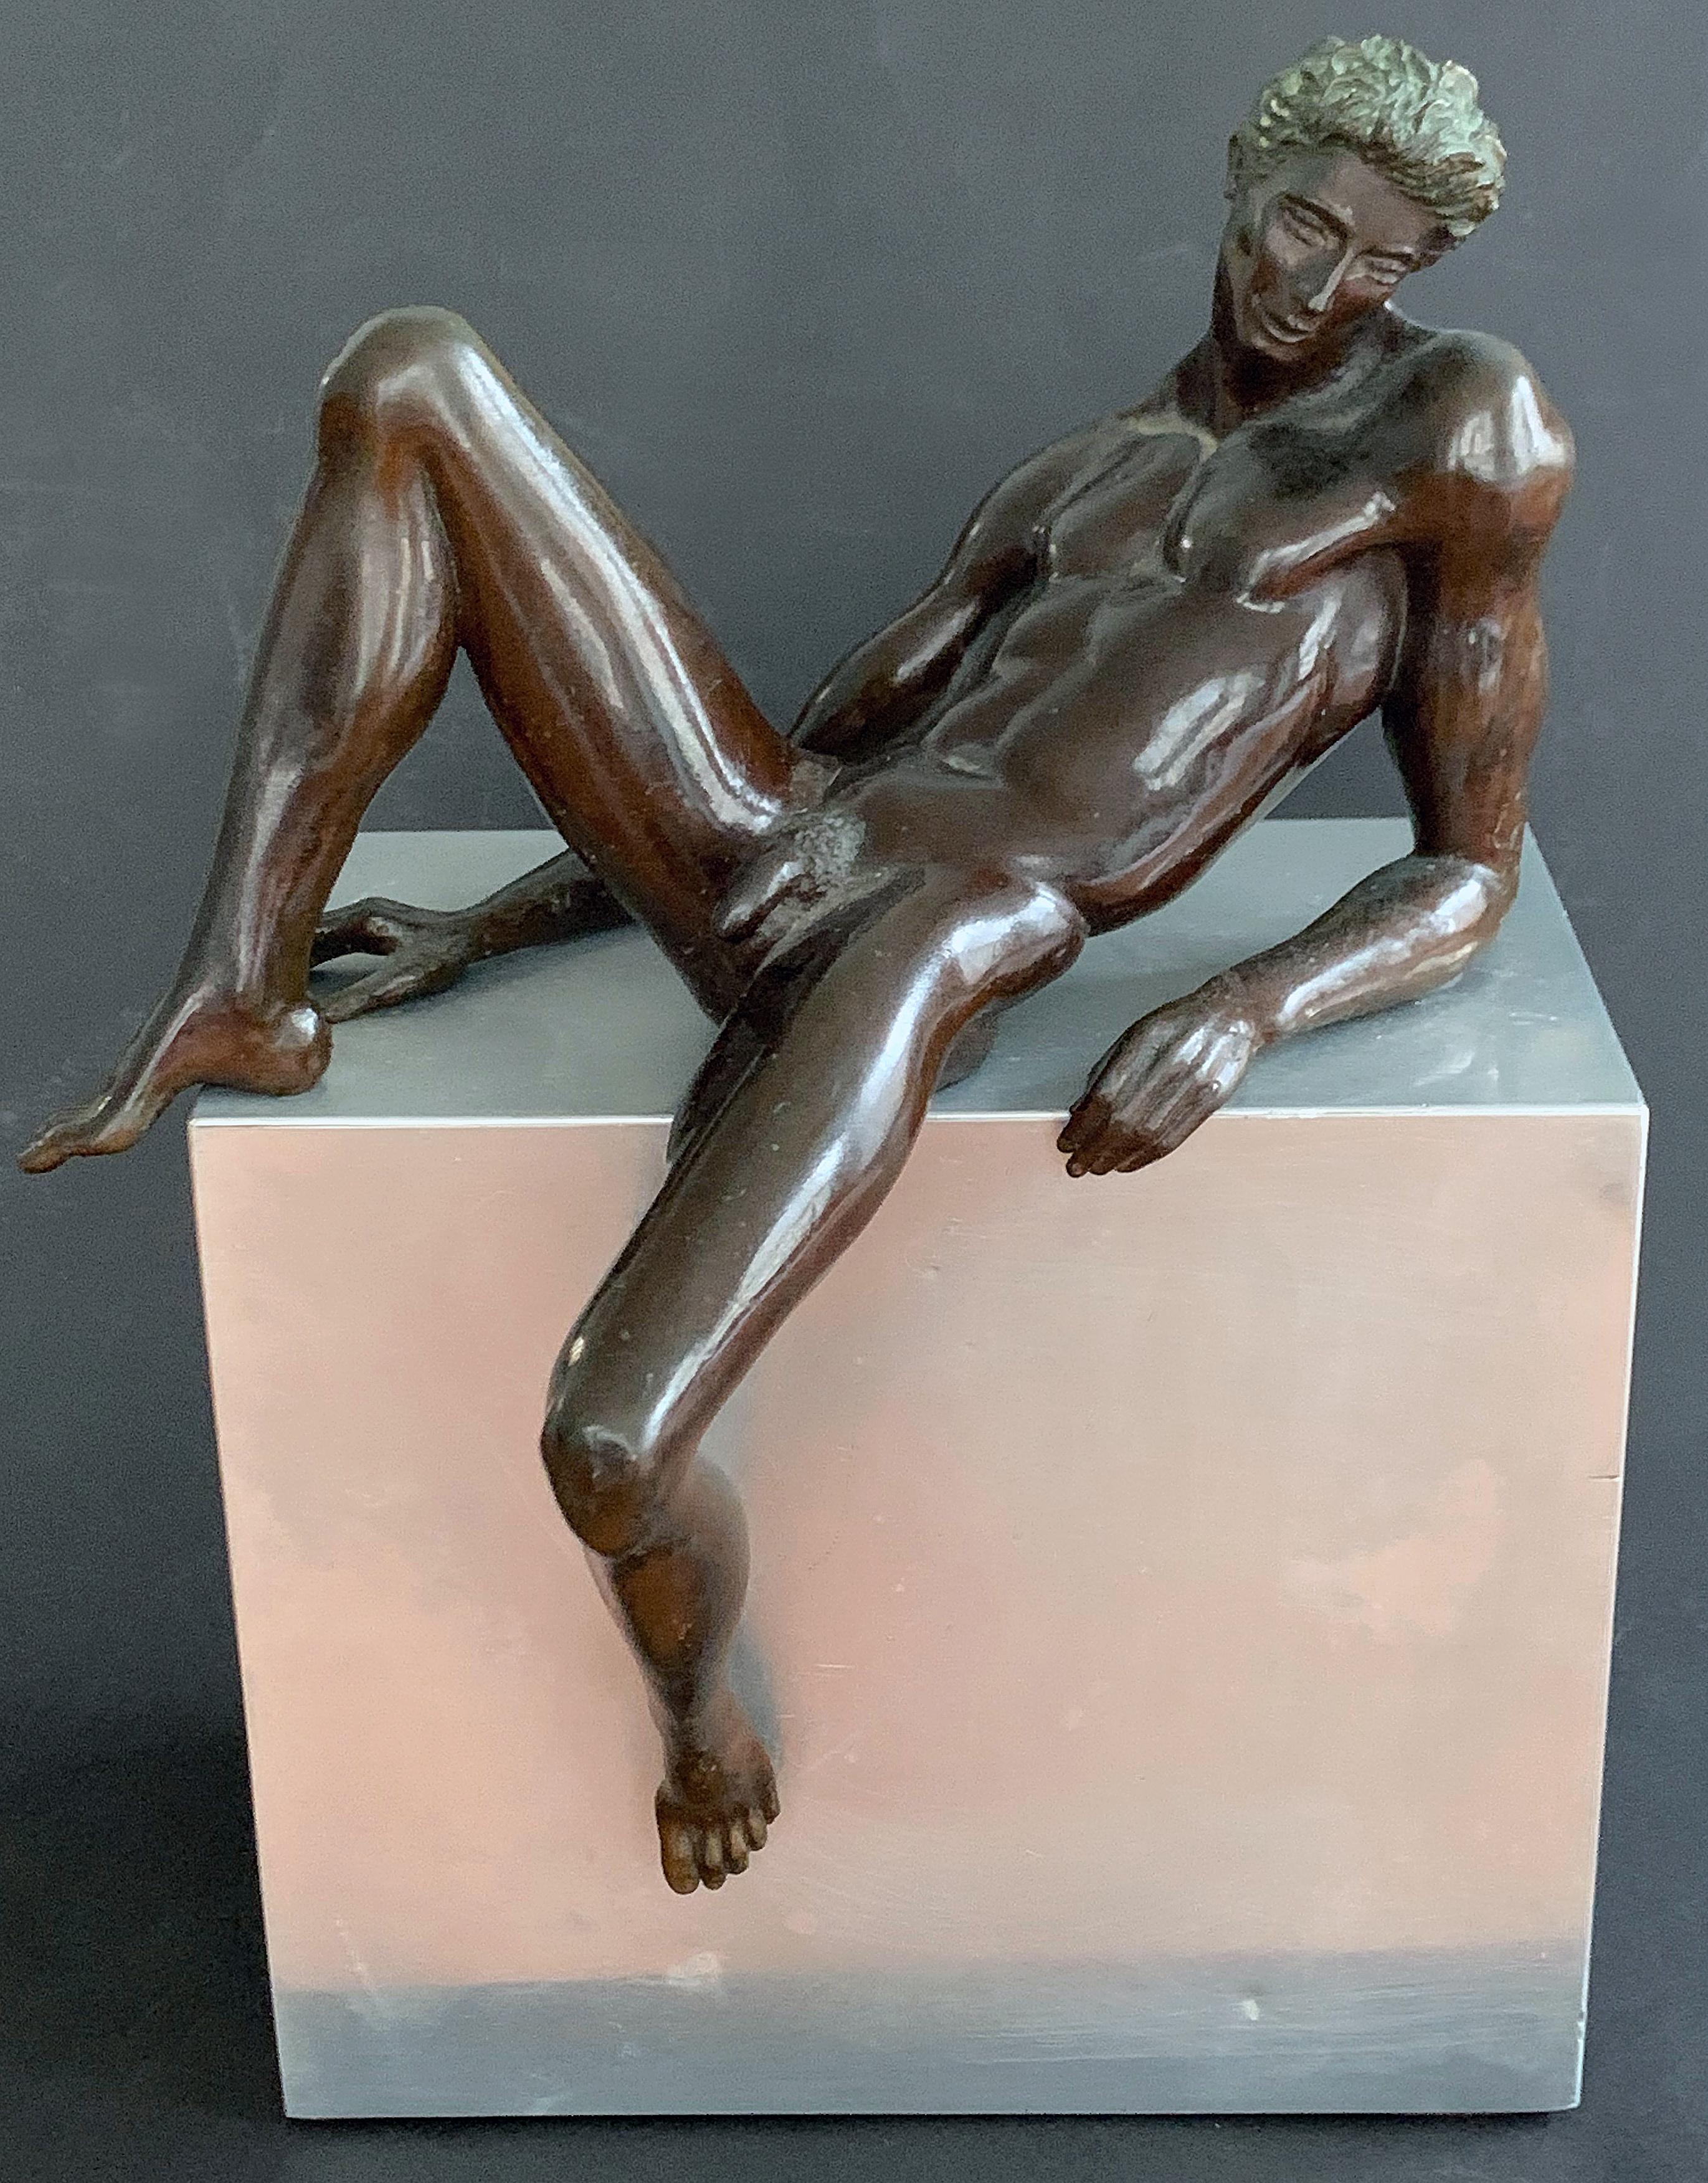 Although America's sculptors interested in African American life and Black subjects, including Elizabeth Catlett, Richmond Barthé, Sargent Johnson and Augusta Savage, are increasingly appreciated and collected today, others, such as Nathaniel